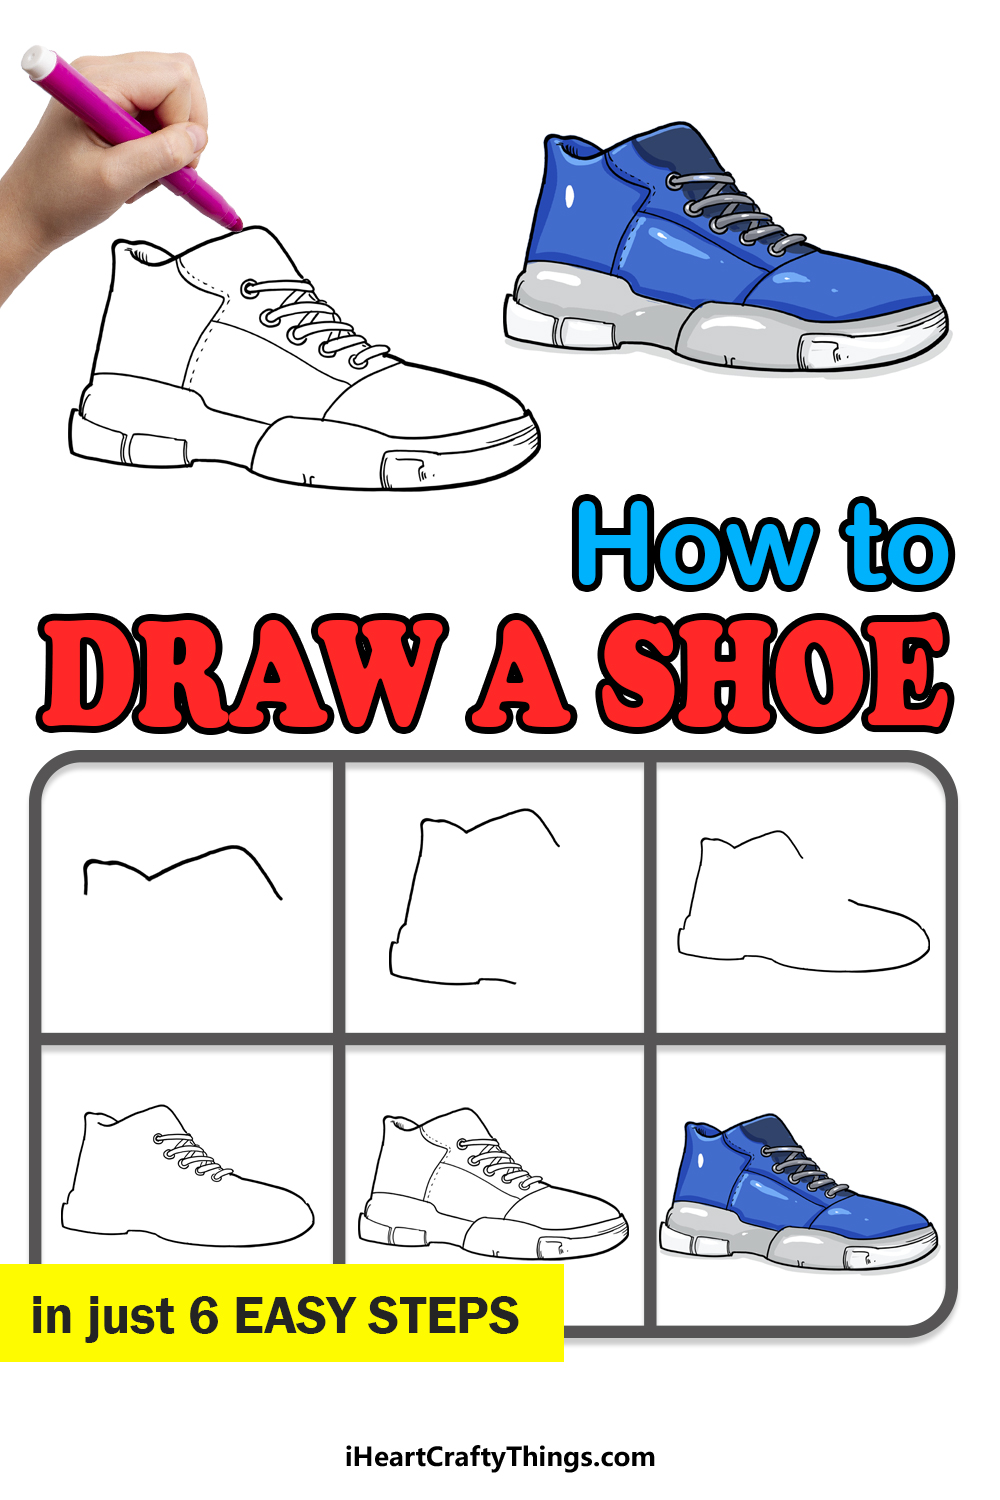 How to Draw A Shoe step by step guide